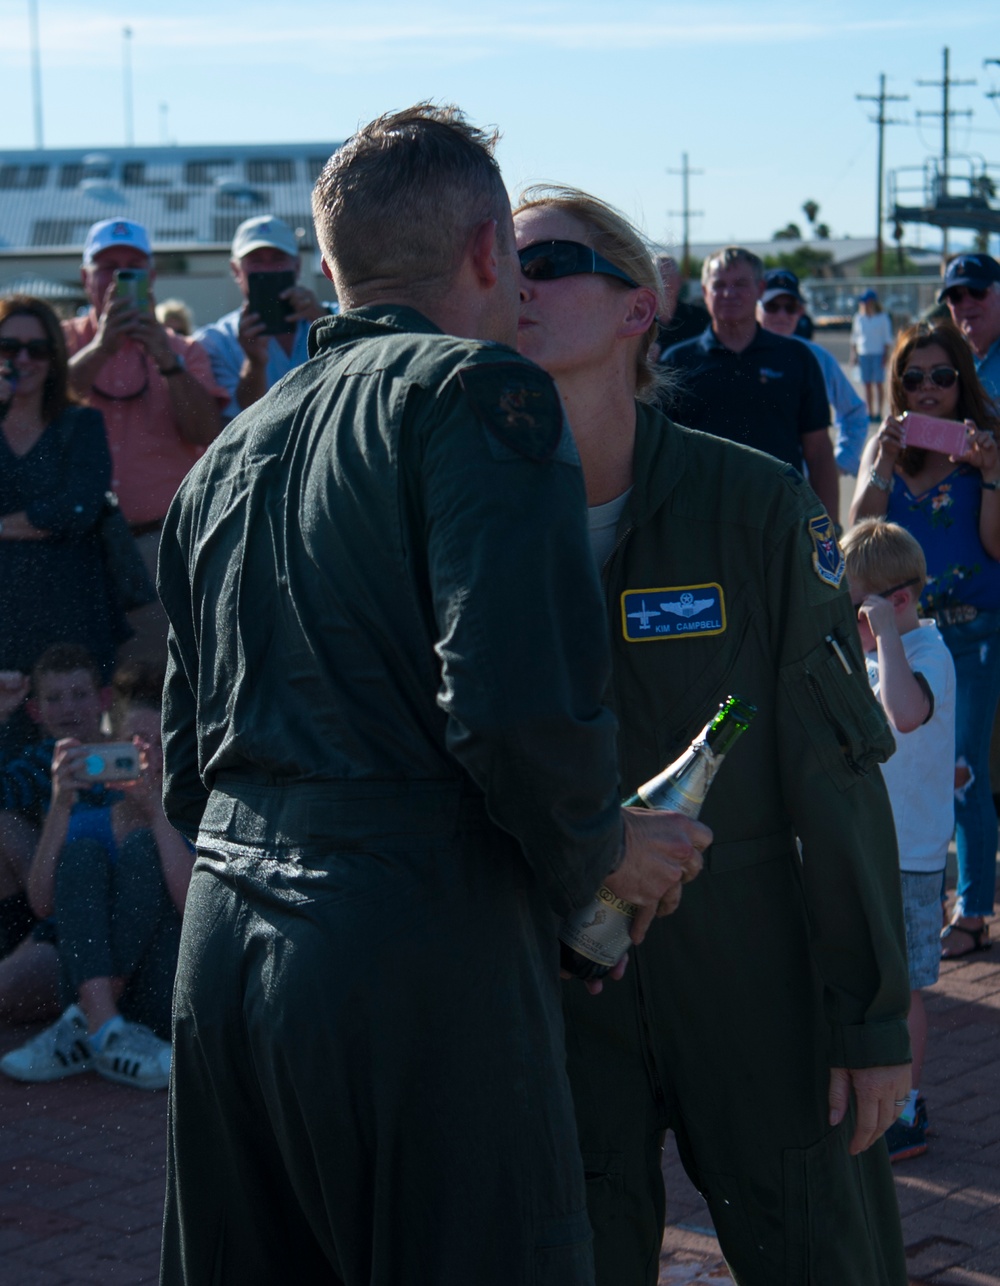 355th fighter wing says farewell to the colonels Campbell.